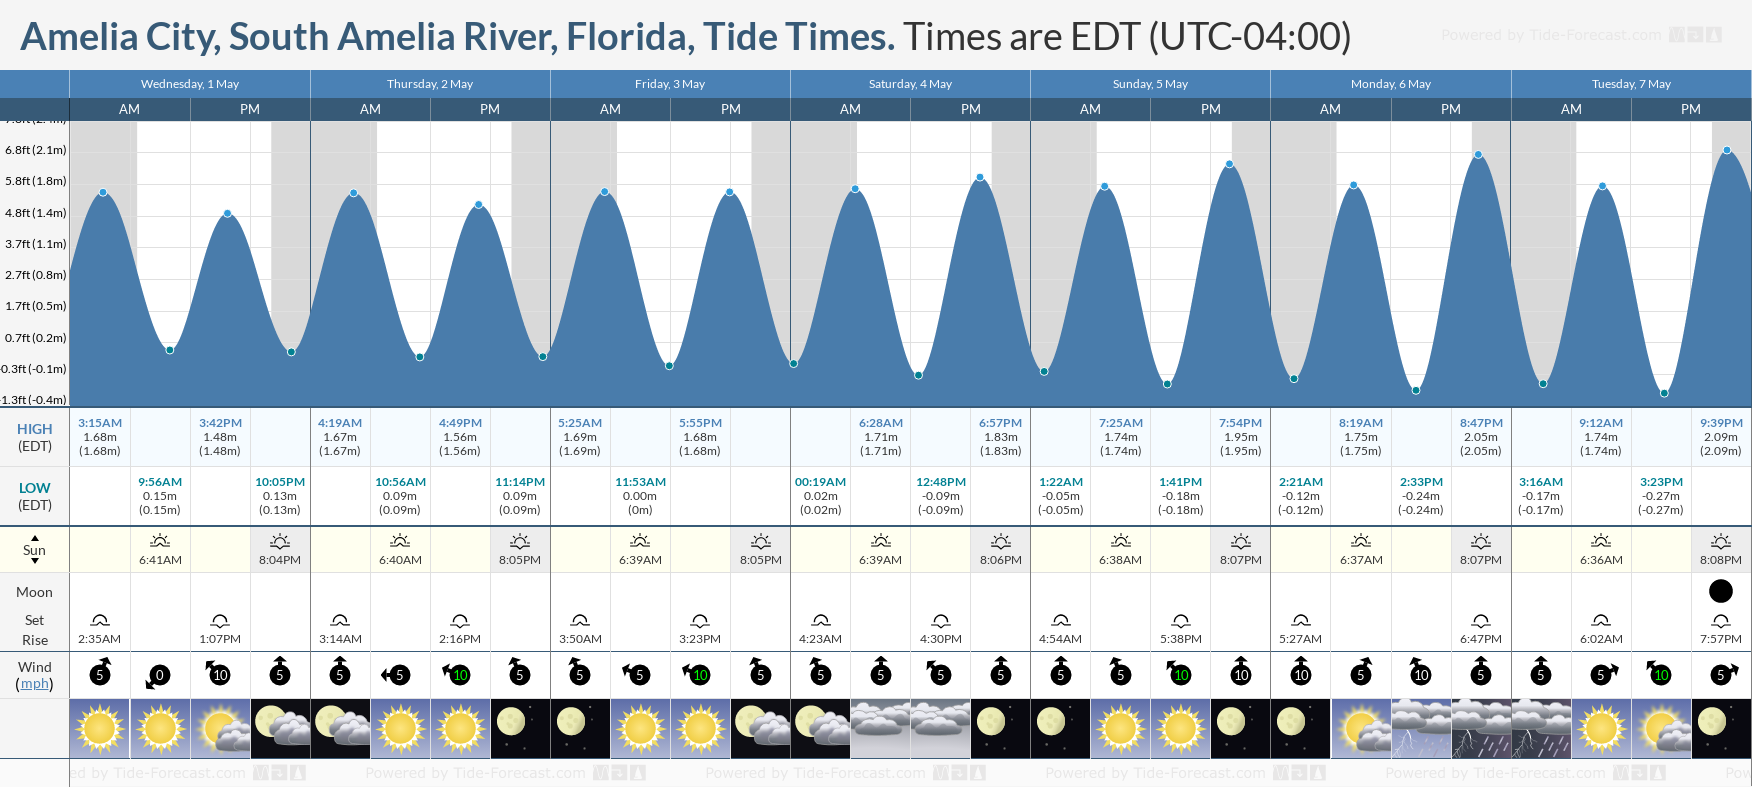 Amelia City, South Amelia River, Florida Tide Chart including high and low tide tide times for the next 7 days